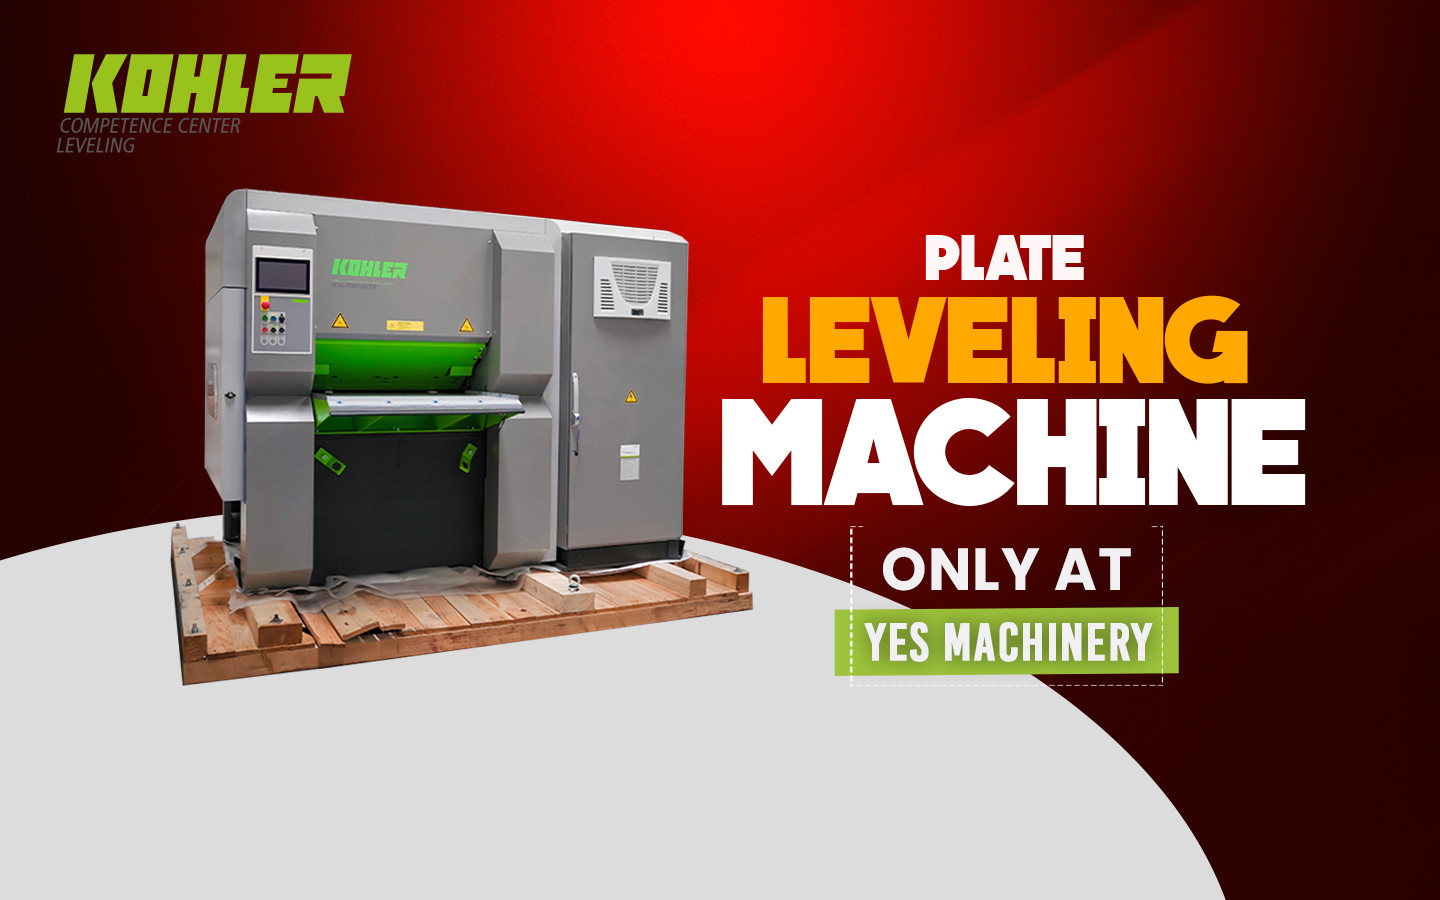 Plate Leveling Machines, only at YES Machinery